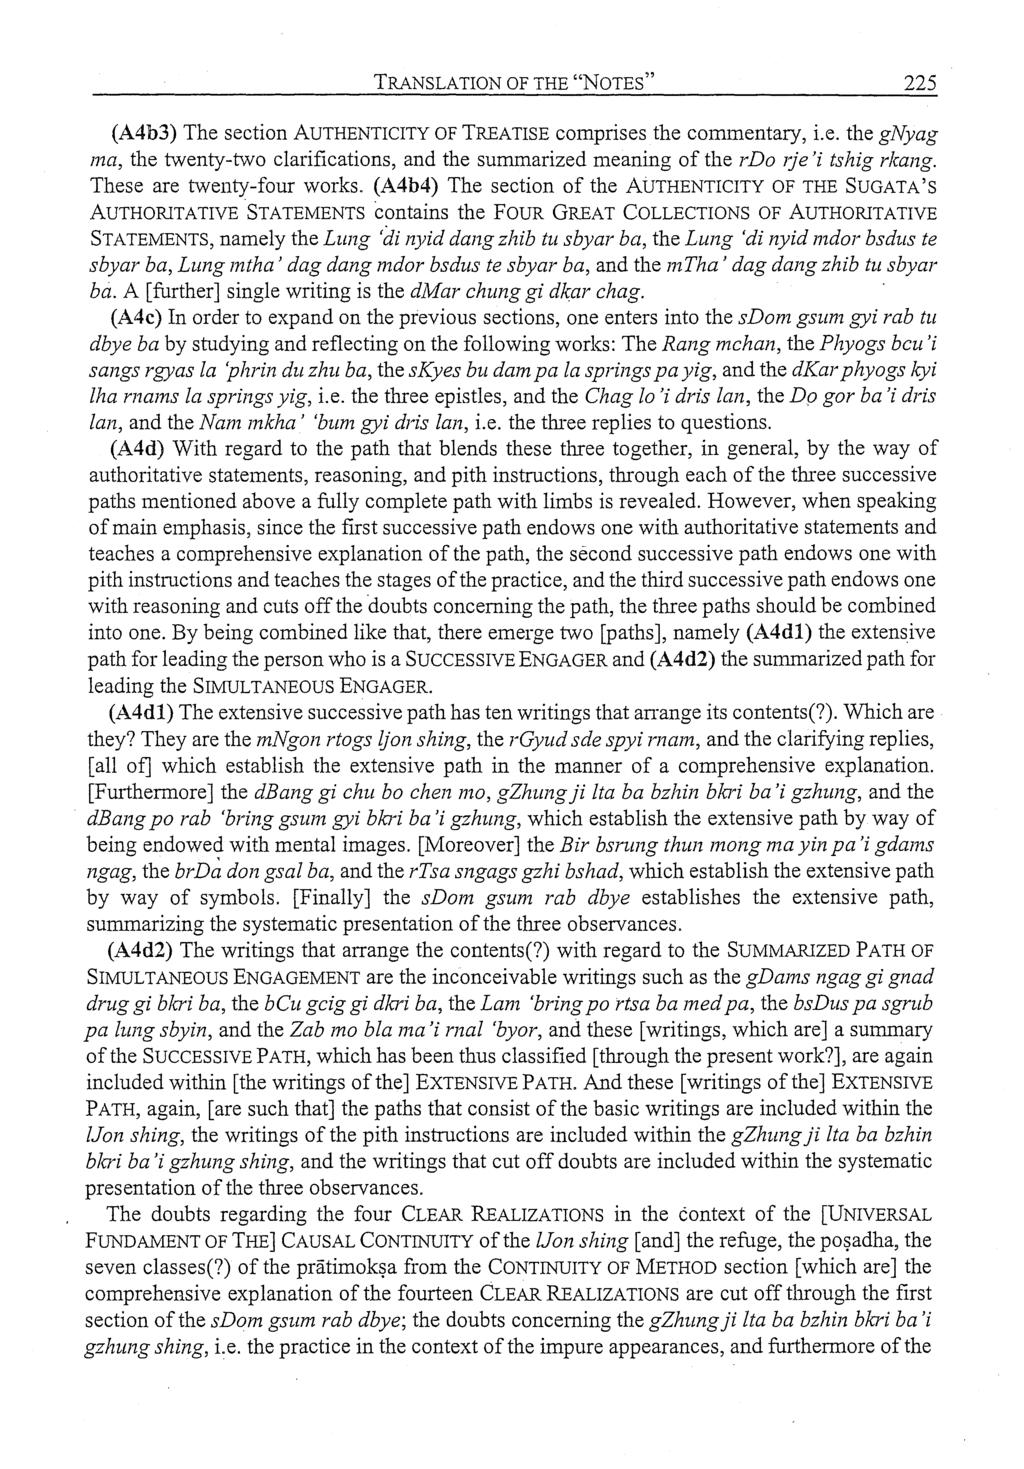 TRANSLATION OF THE "NOTES" 225 (A4b3) The section AUTHENTICITY OF TREATISE comprises the commentary, i.e. the gnyag rna, the twenty-two clarifications, and the summarized meaning of the rdo rje'i tshig rkang.